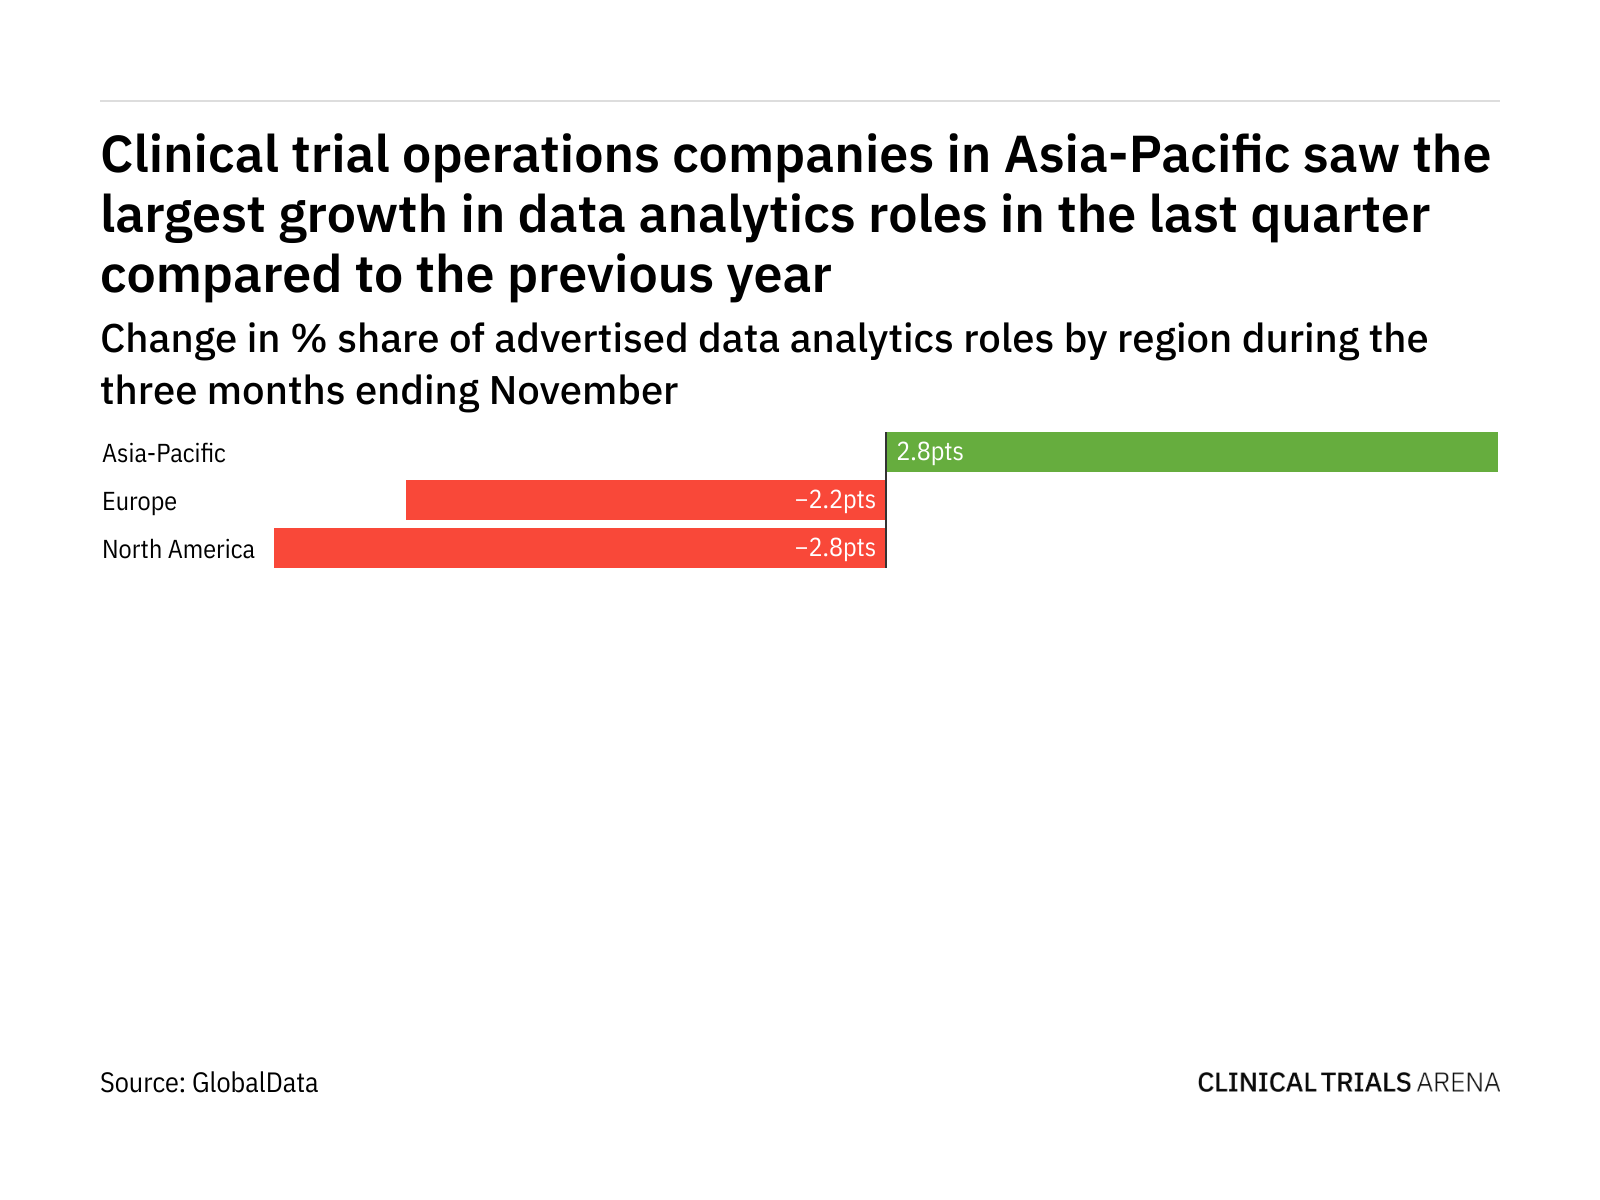 Which Asia-Pacific country sees most growth for data analytics roles in clinical trials?